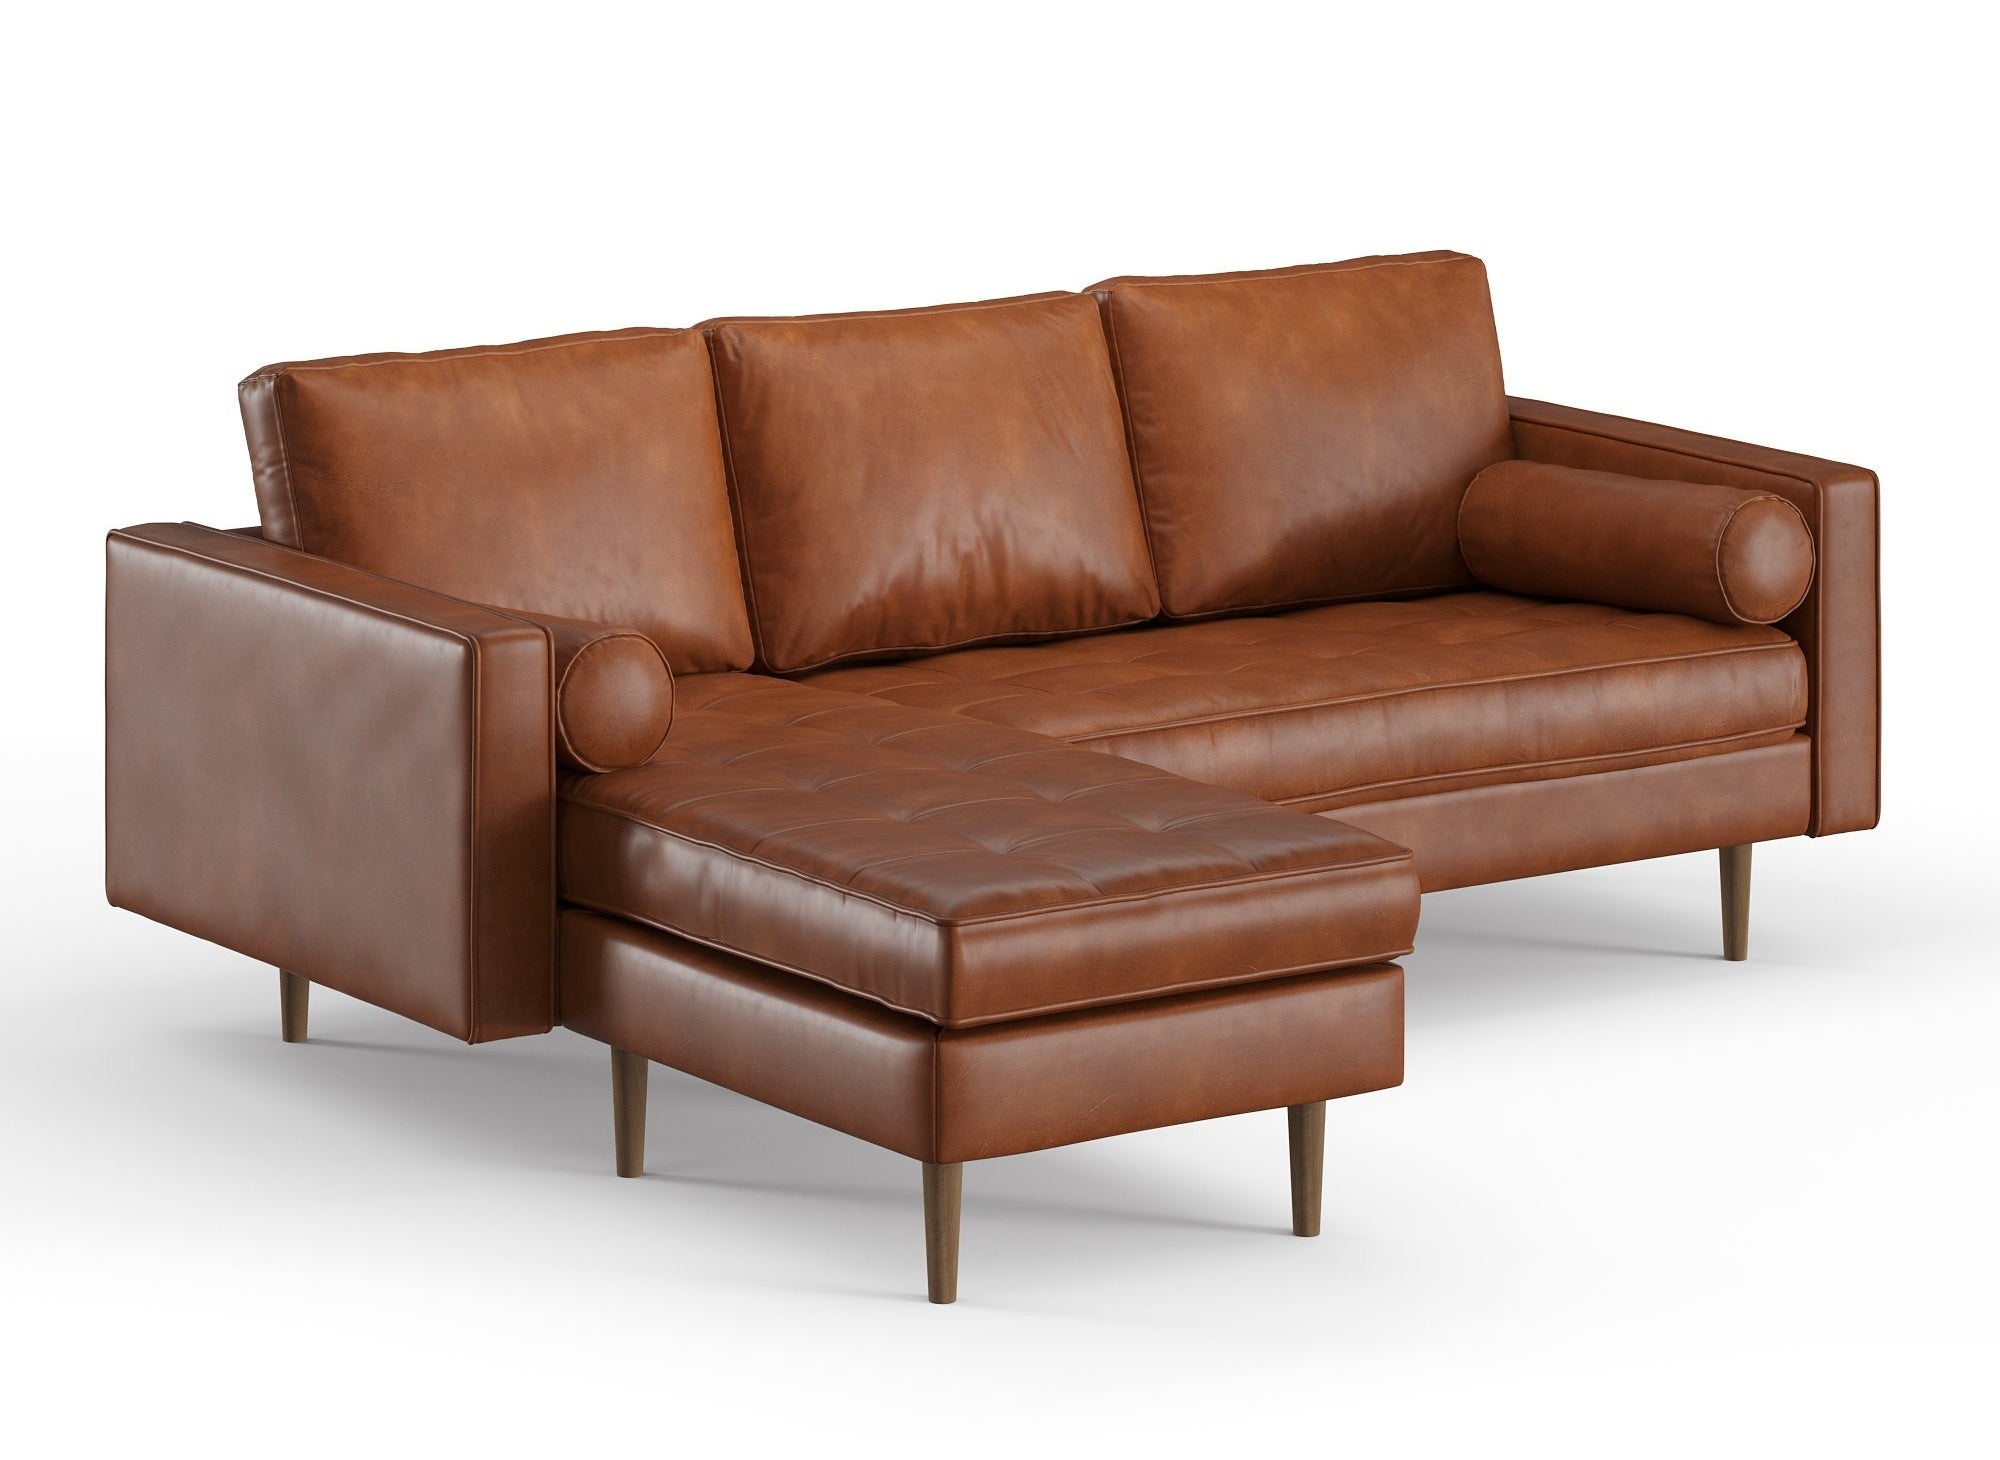 A brown faux leather sectional